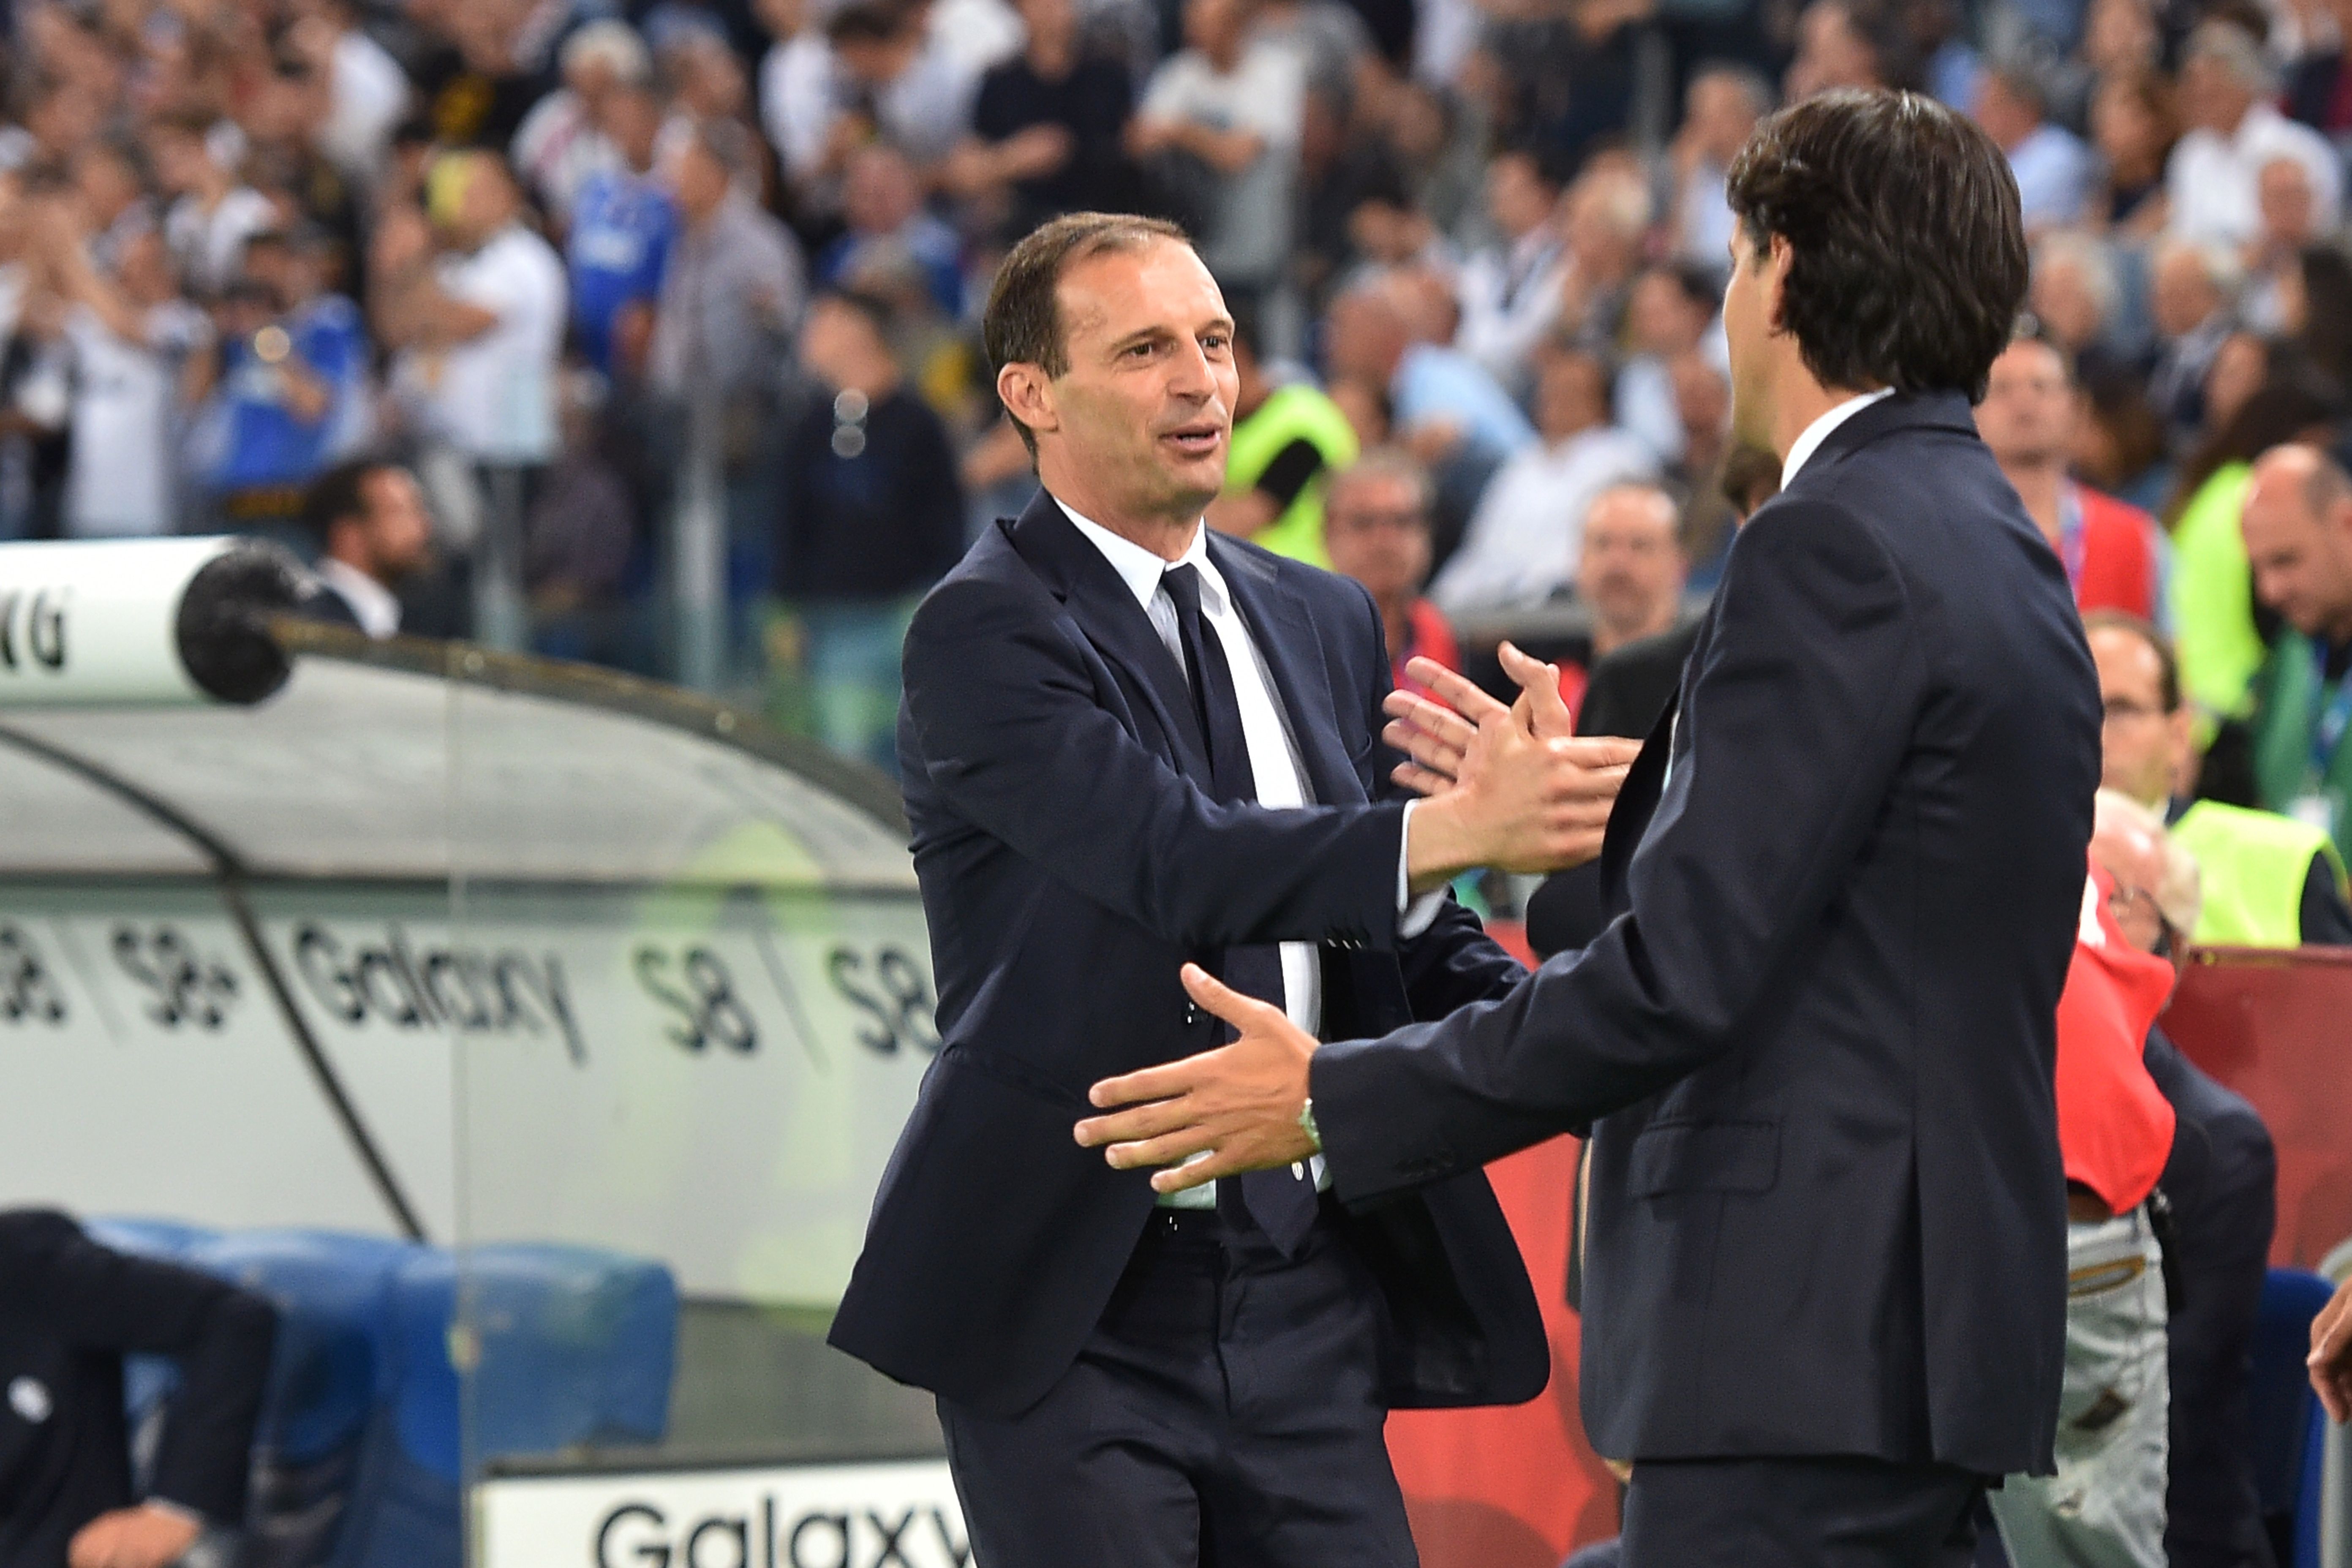 Lazio's coach from Italy Simone Inzaghi (R) greets Juventus' coach from Italy Massimiliano Allegri before the Italian Tim Cup final on May 17, 2017 at the Olympic stadium in Rome.  / AFP PHOTO / Andreas SOLARO        (Photo credit should read ANDREAS SOLARO/AFP/Getty Images)